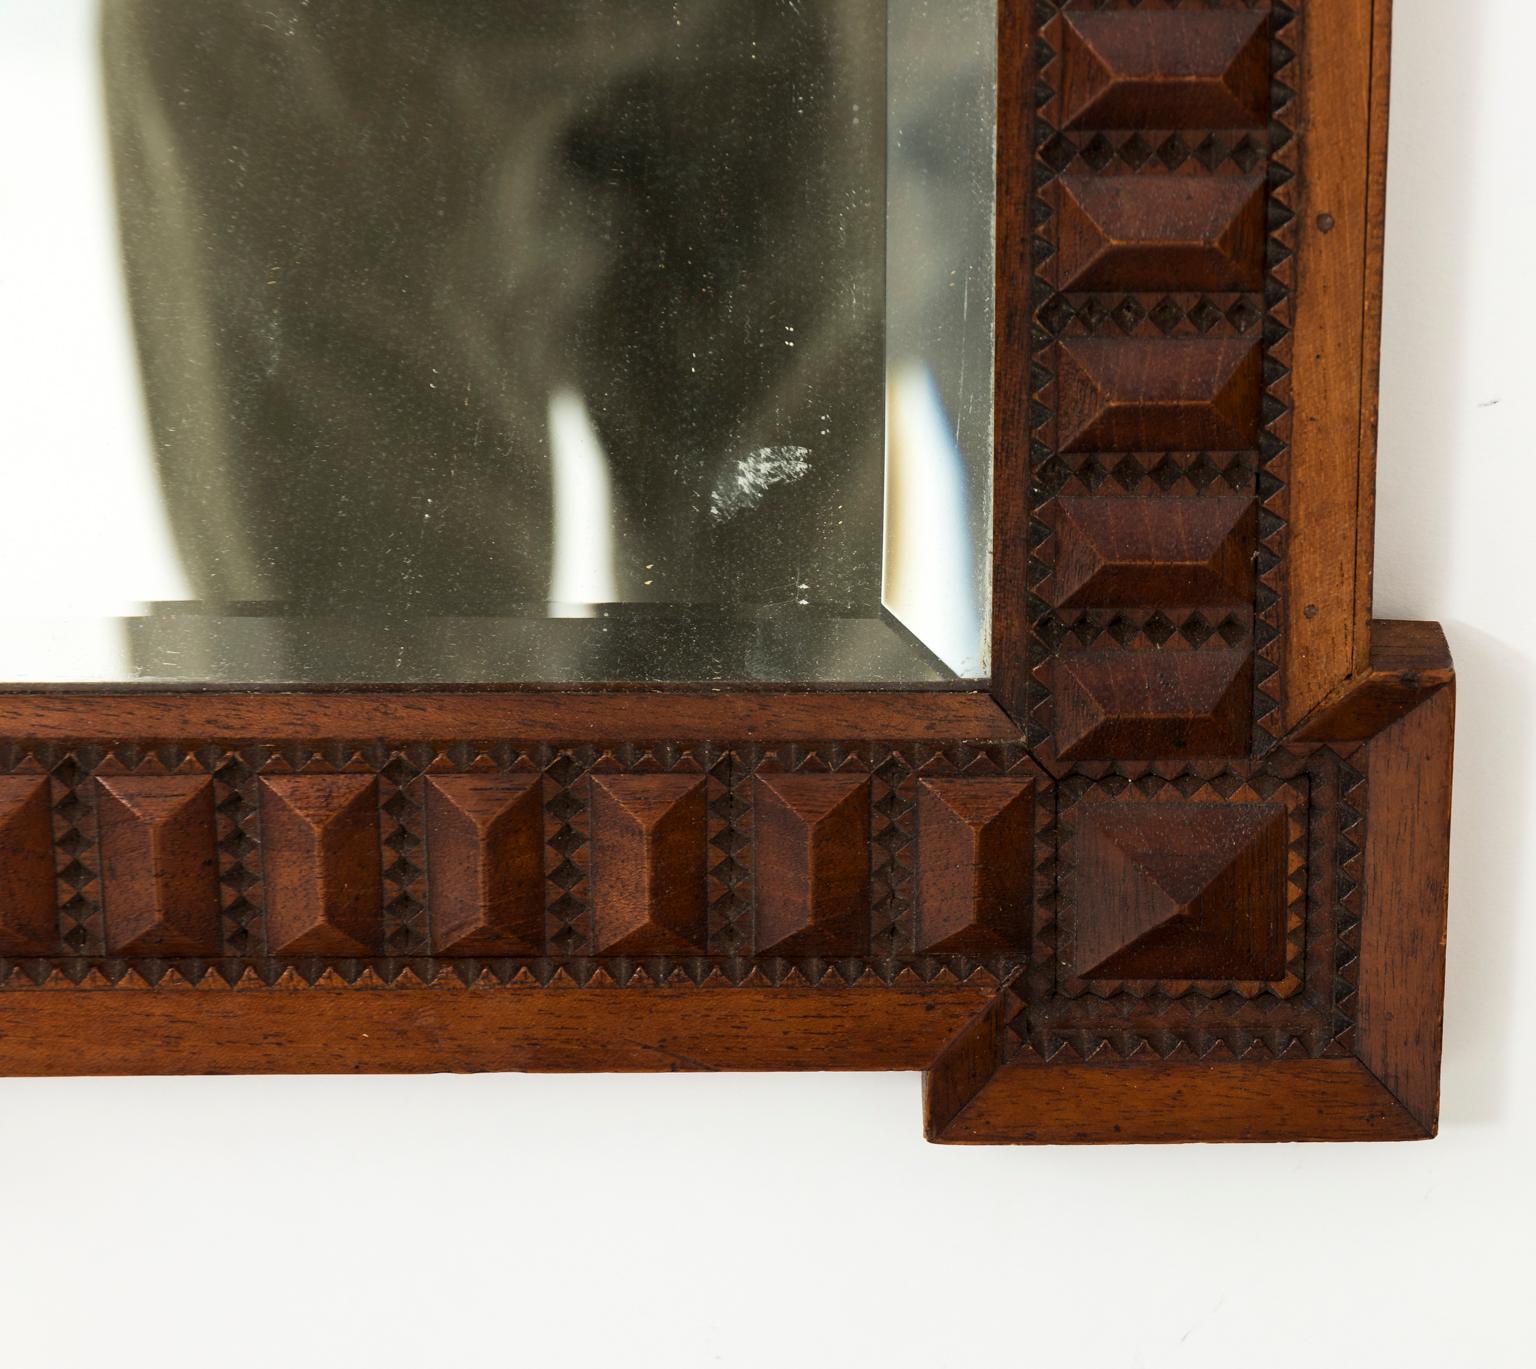 Carved wood mirror with dog ear corners and nail-head trim, circa mid-20th century.
   